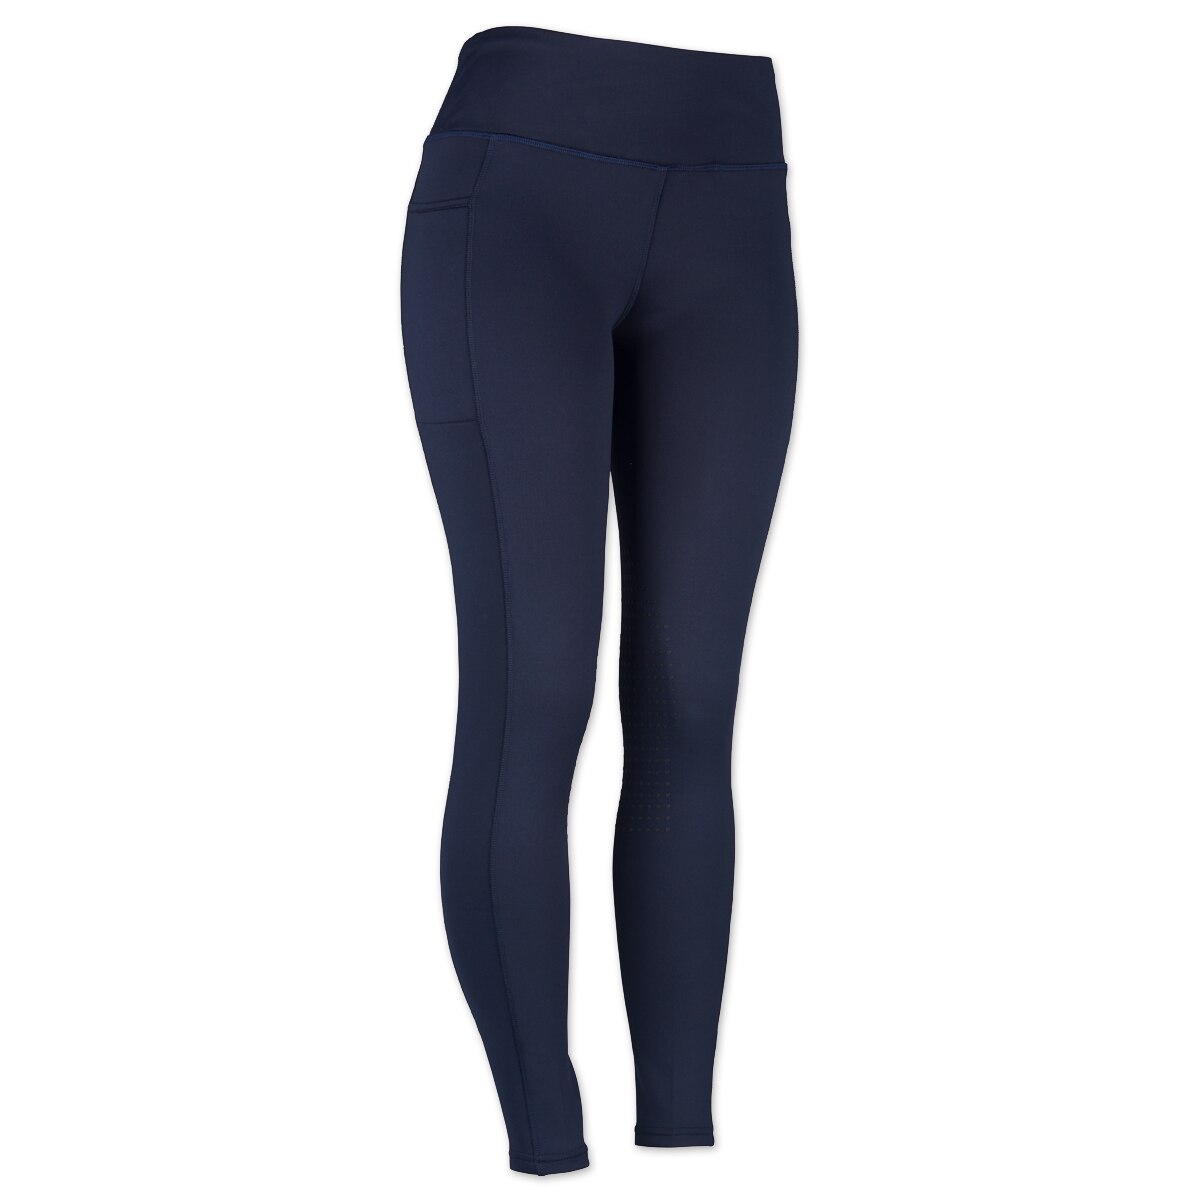 Piper Riding Tights by SmartPak - Knee Patch